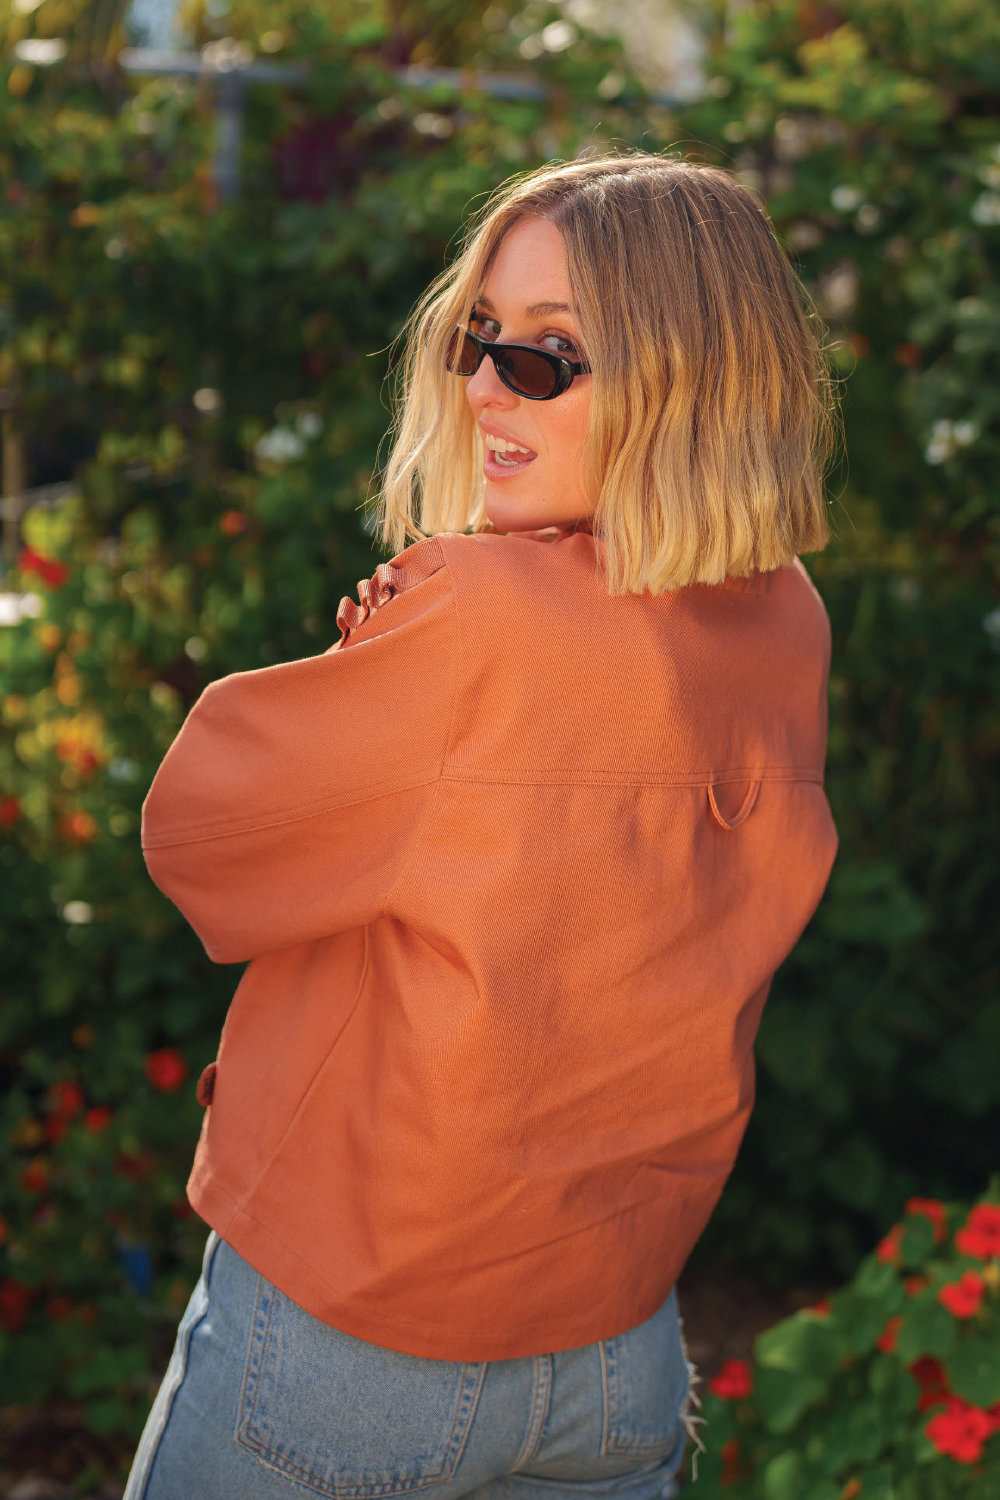 blonde woman smiling while looking over shoulder wearing oval sunglasses coral red denim 4-pocket long sleeve outdoor denim jacket and Levis jeans with garden in background